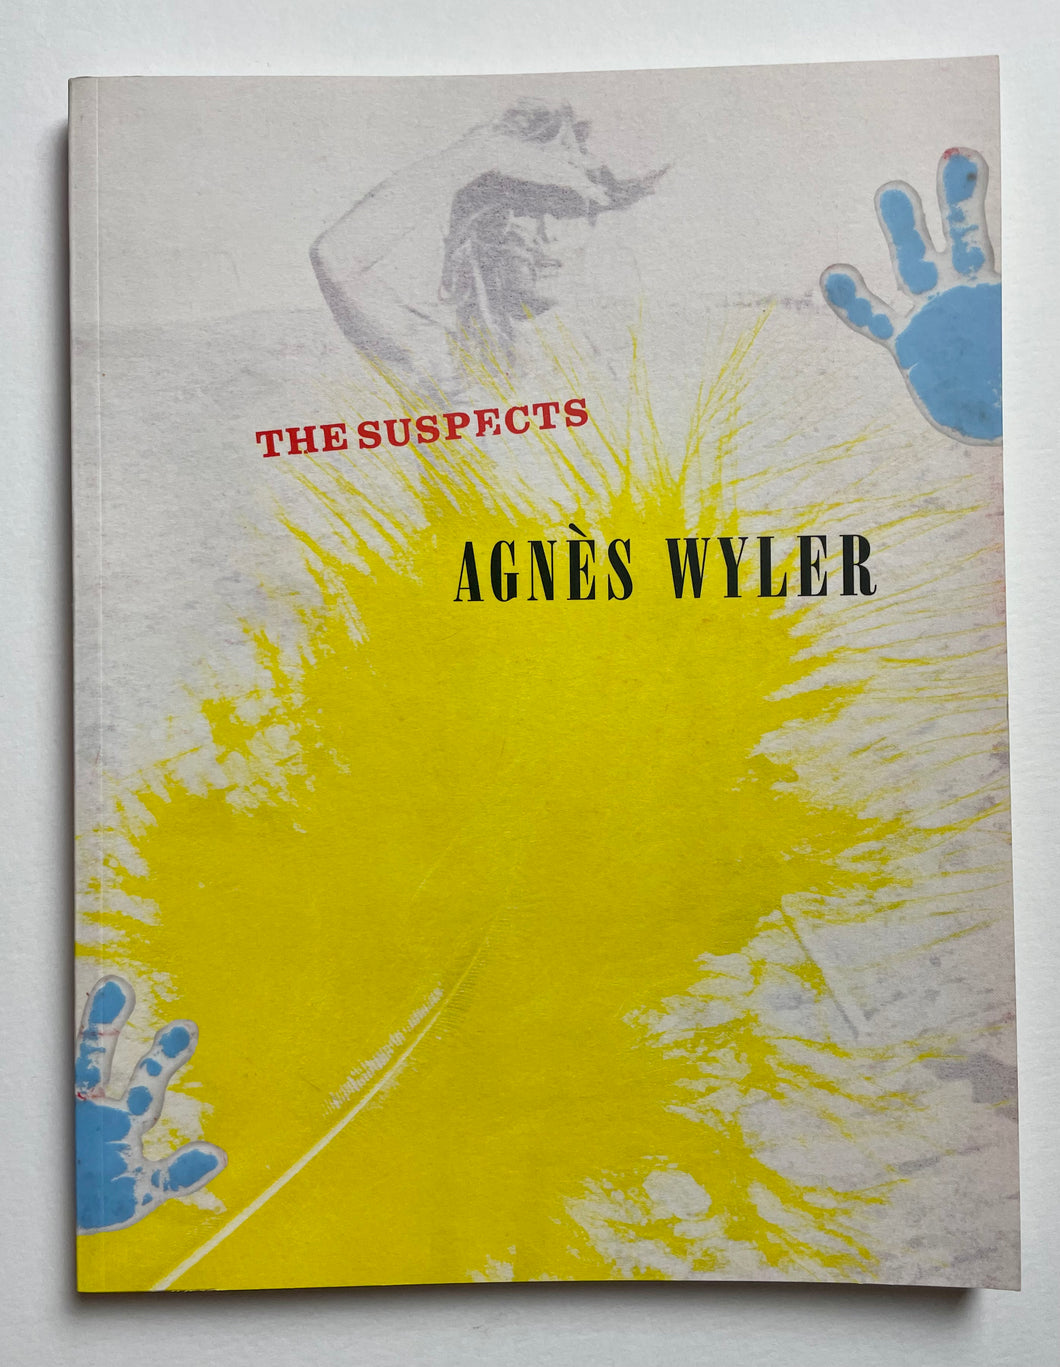 The Suspects | Agnes Wyler (Revolver Publishing)